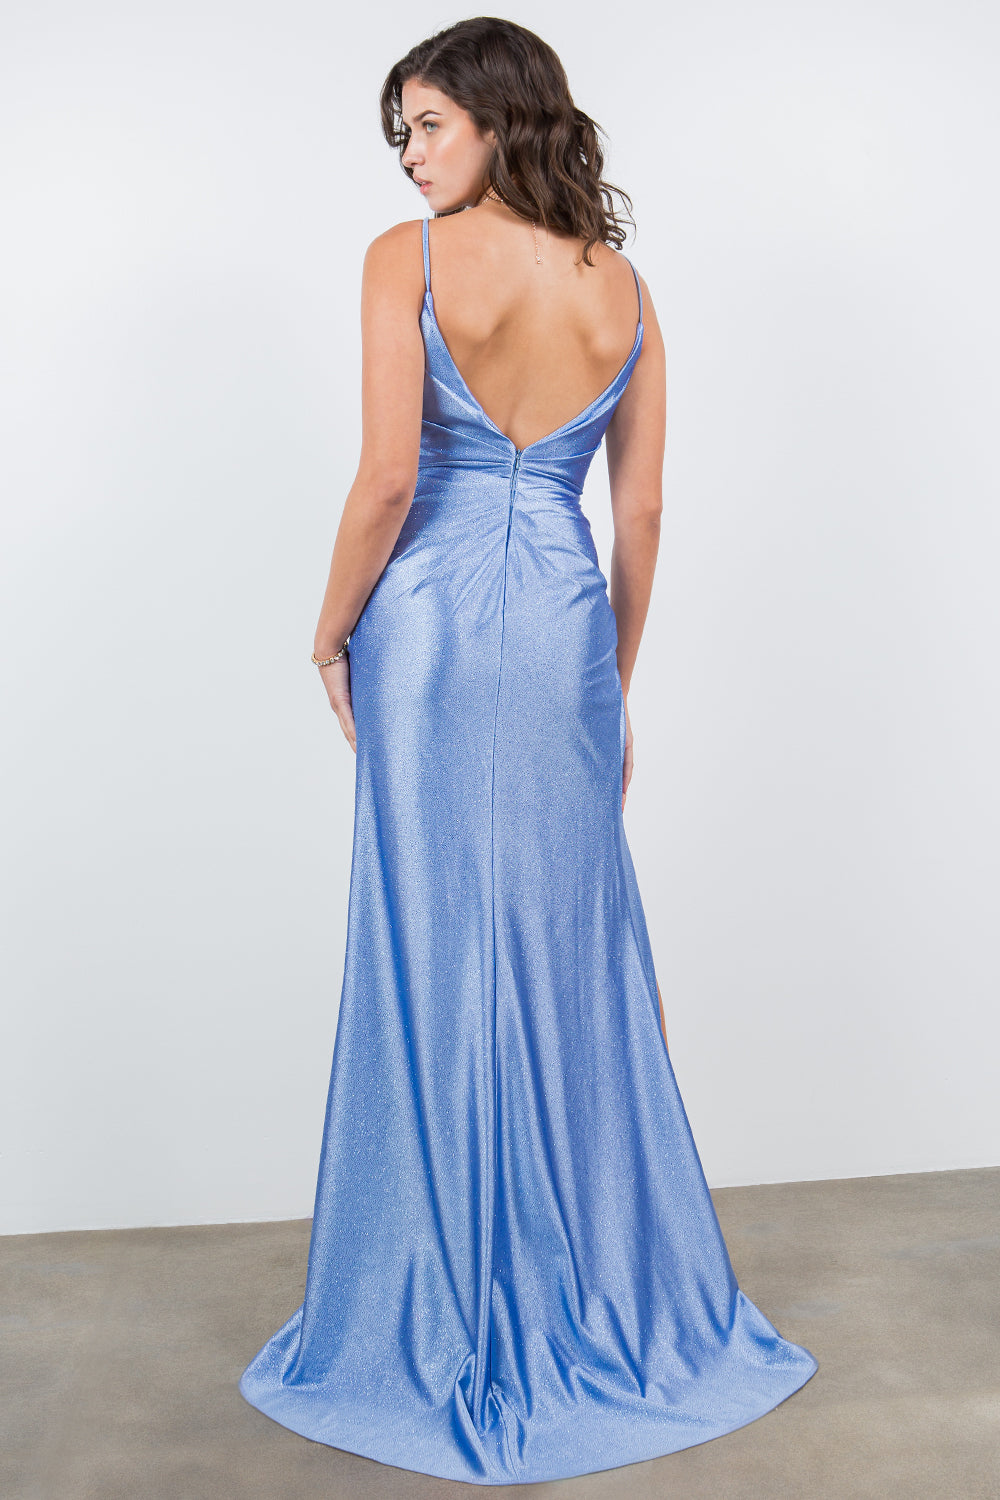 Glitter Satin Sleeveless Slit Gown by Cinderella Couture 8117J